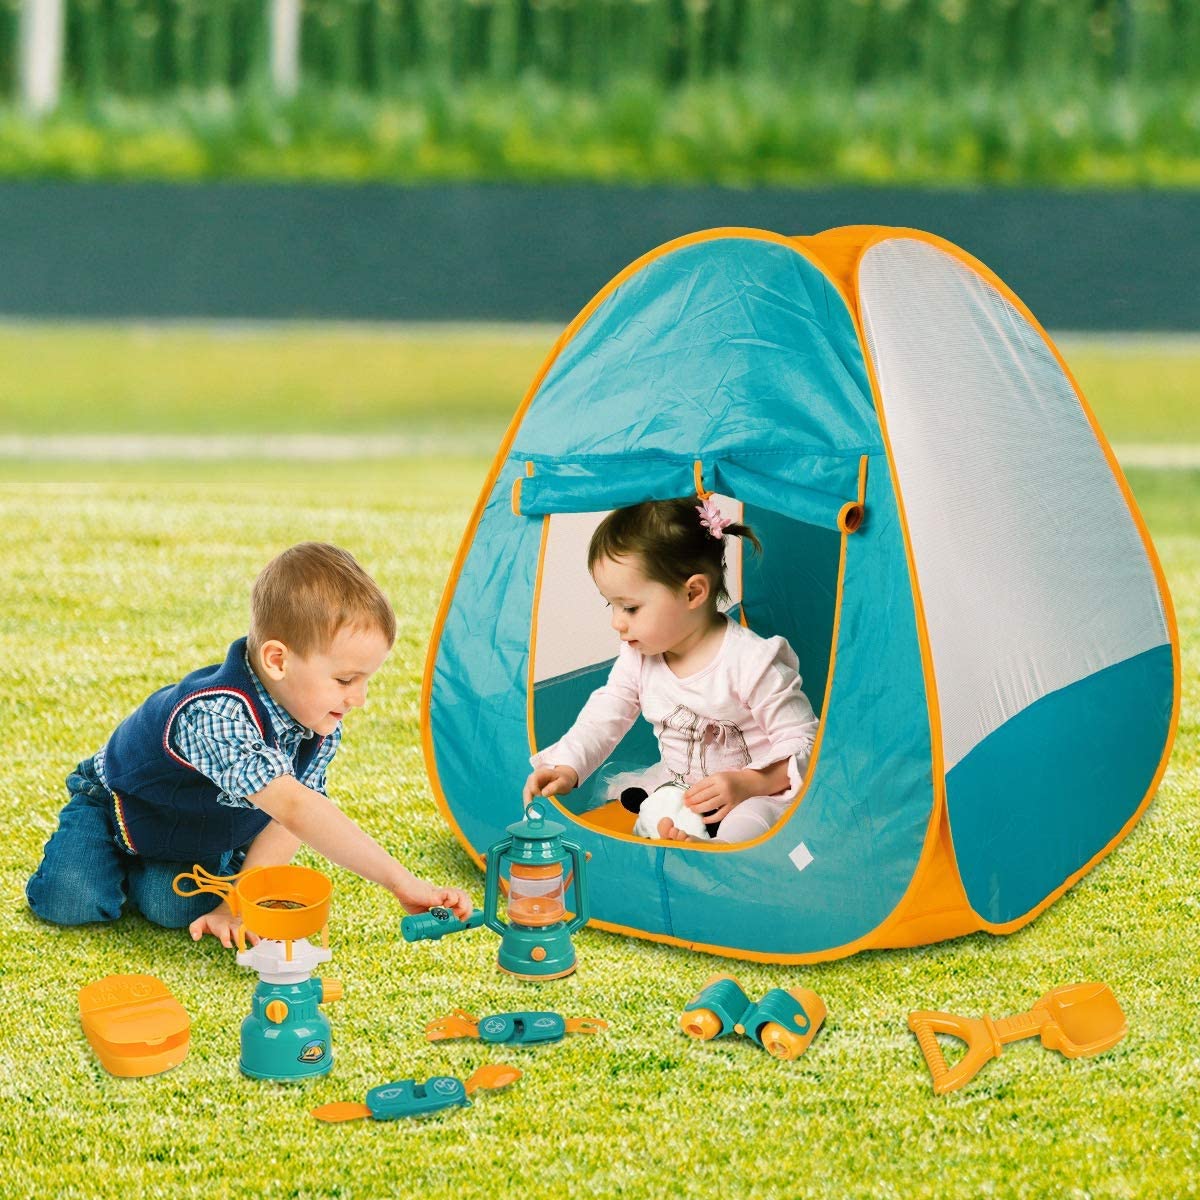 A Must-Have Camping Set for Little Explorers